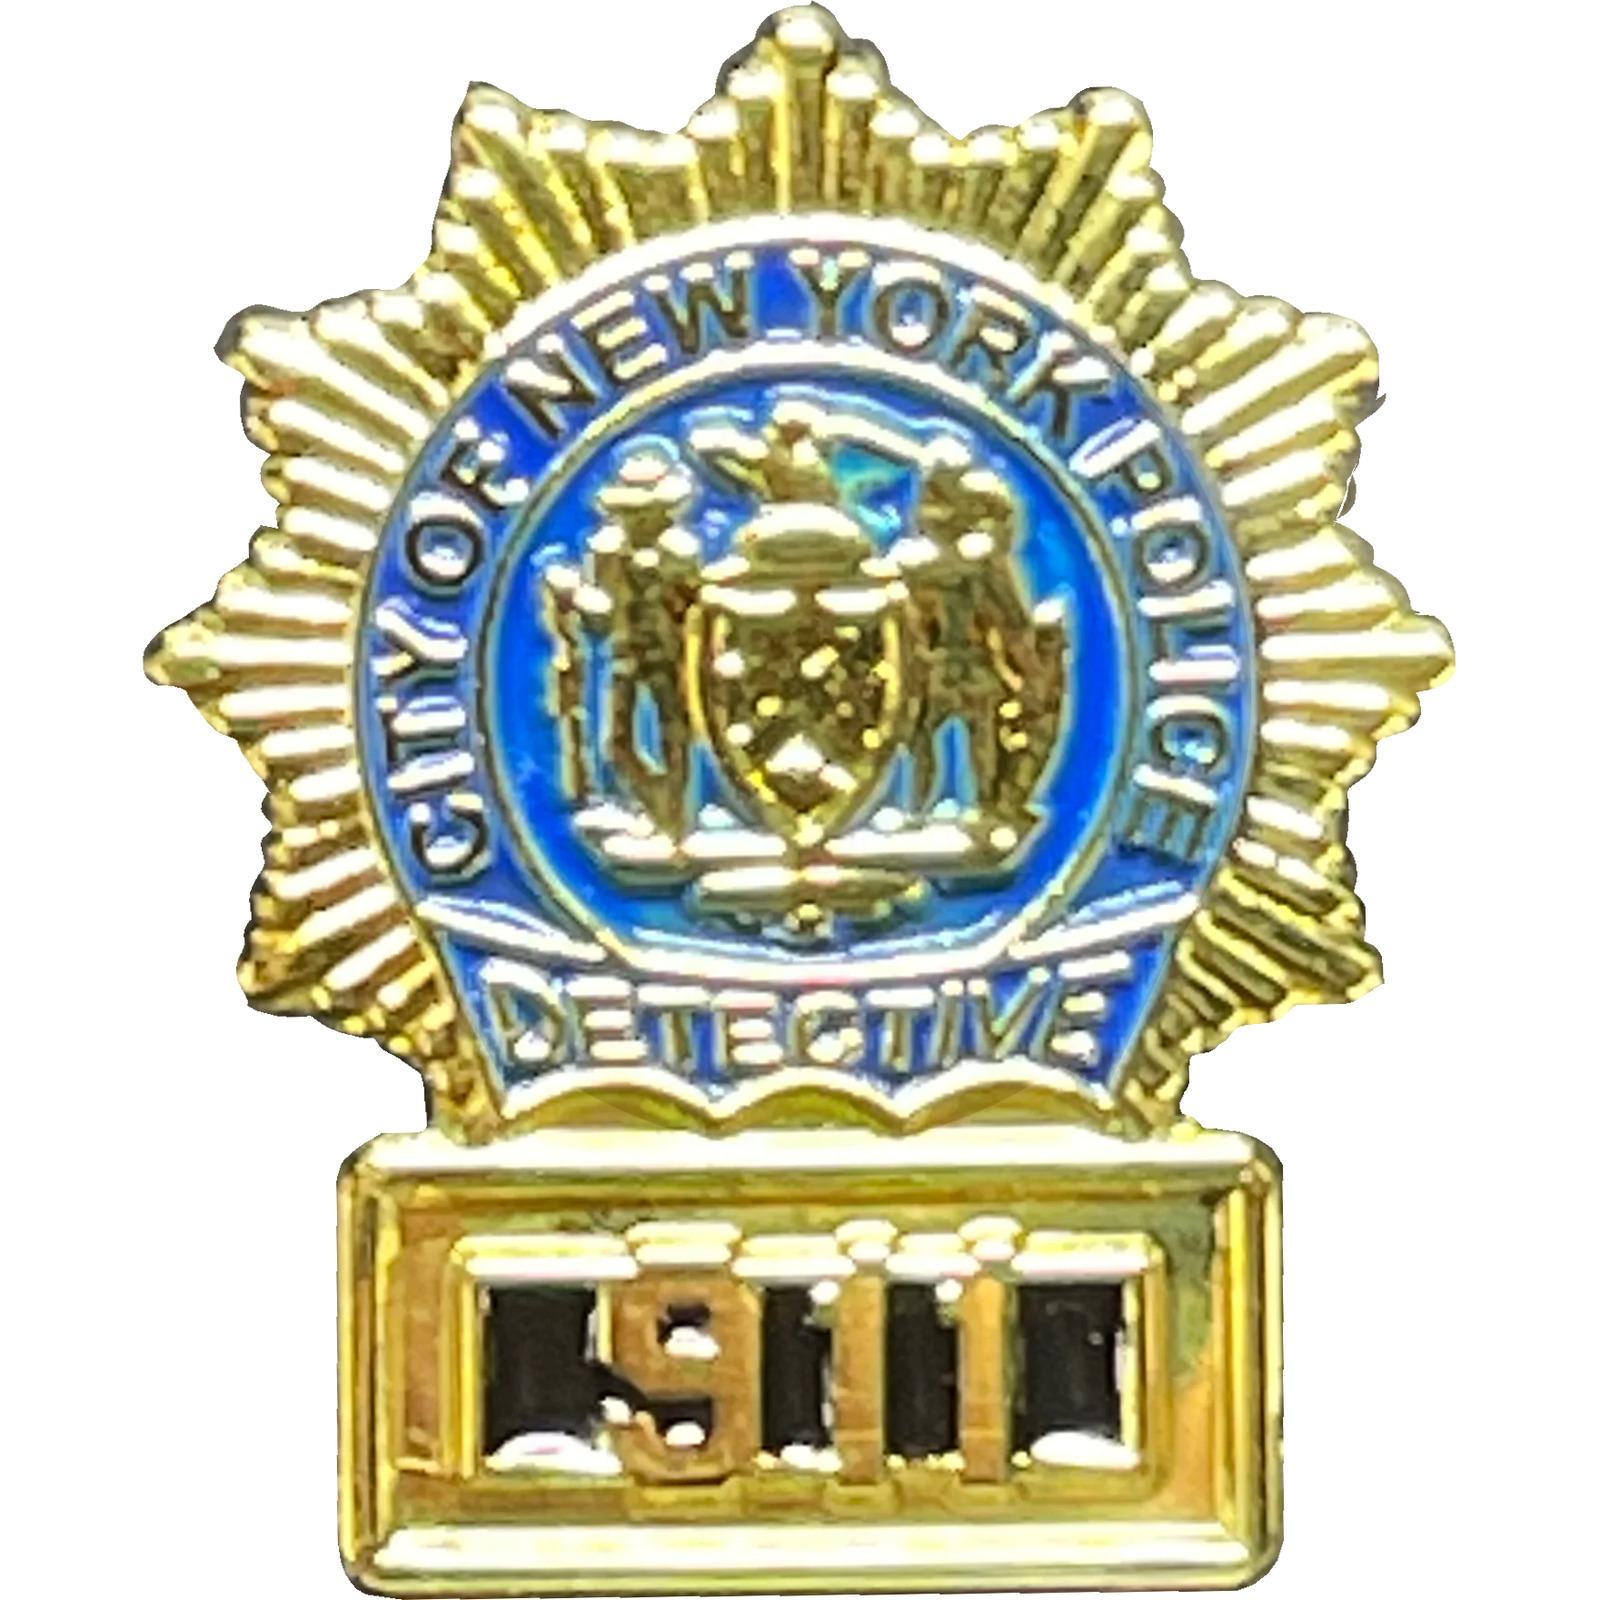 New York City Police Detective 911 Pin BL15-010 ZQ-54A